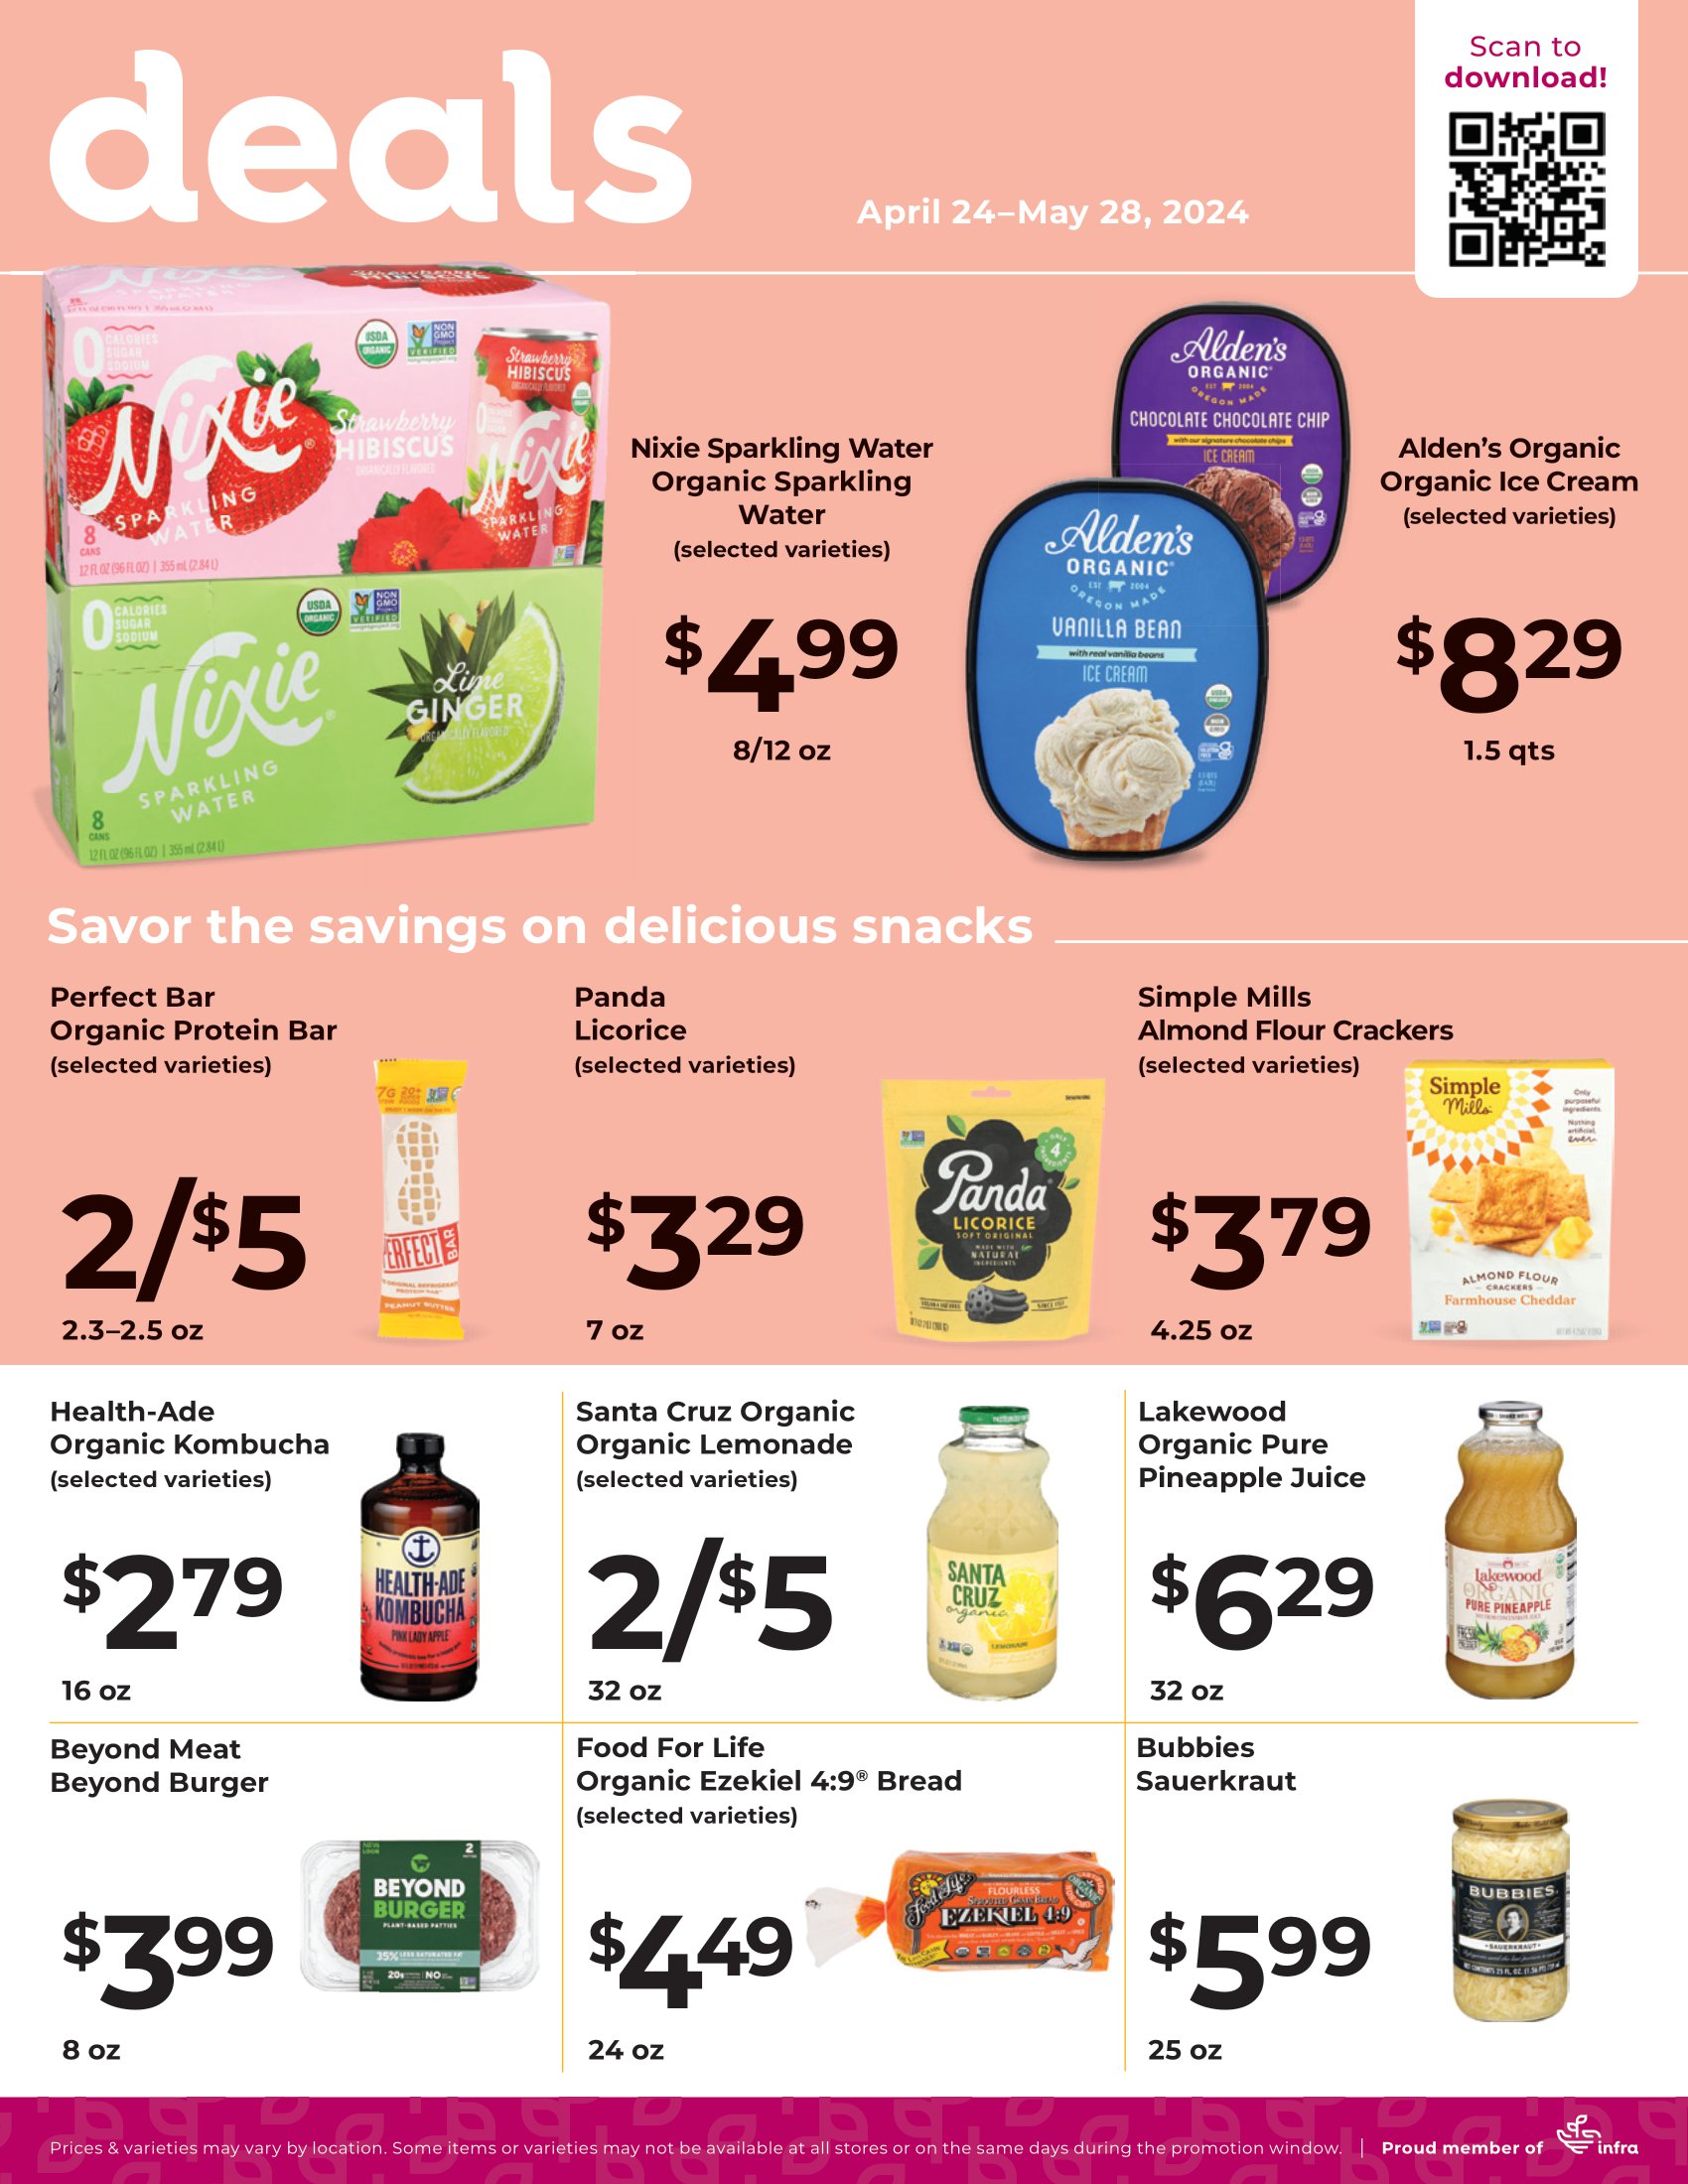 Ramona Family Naturals - monthly specials page 1